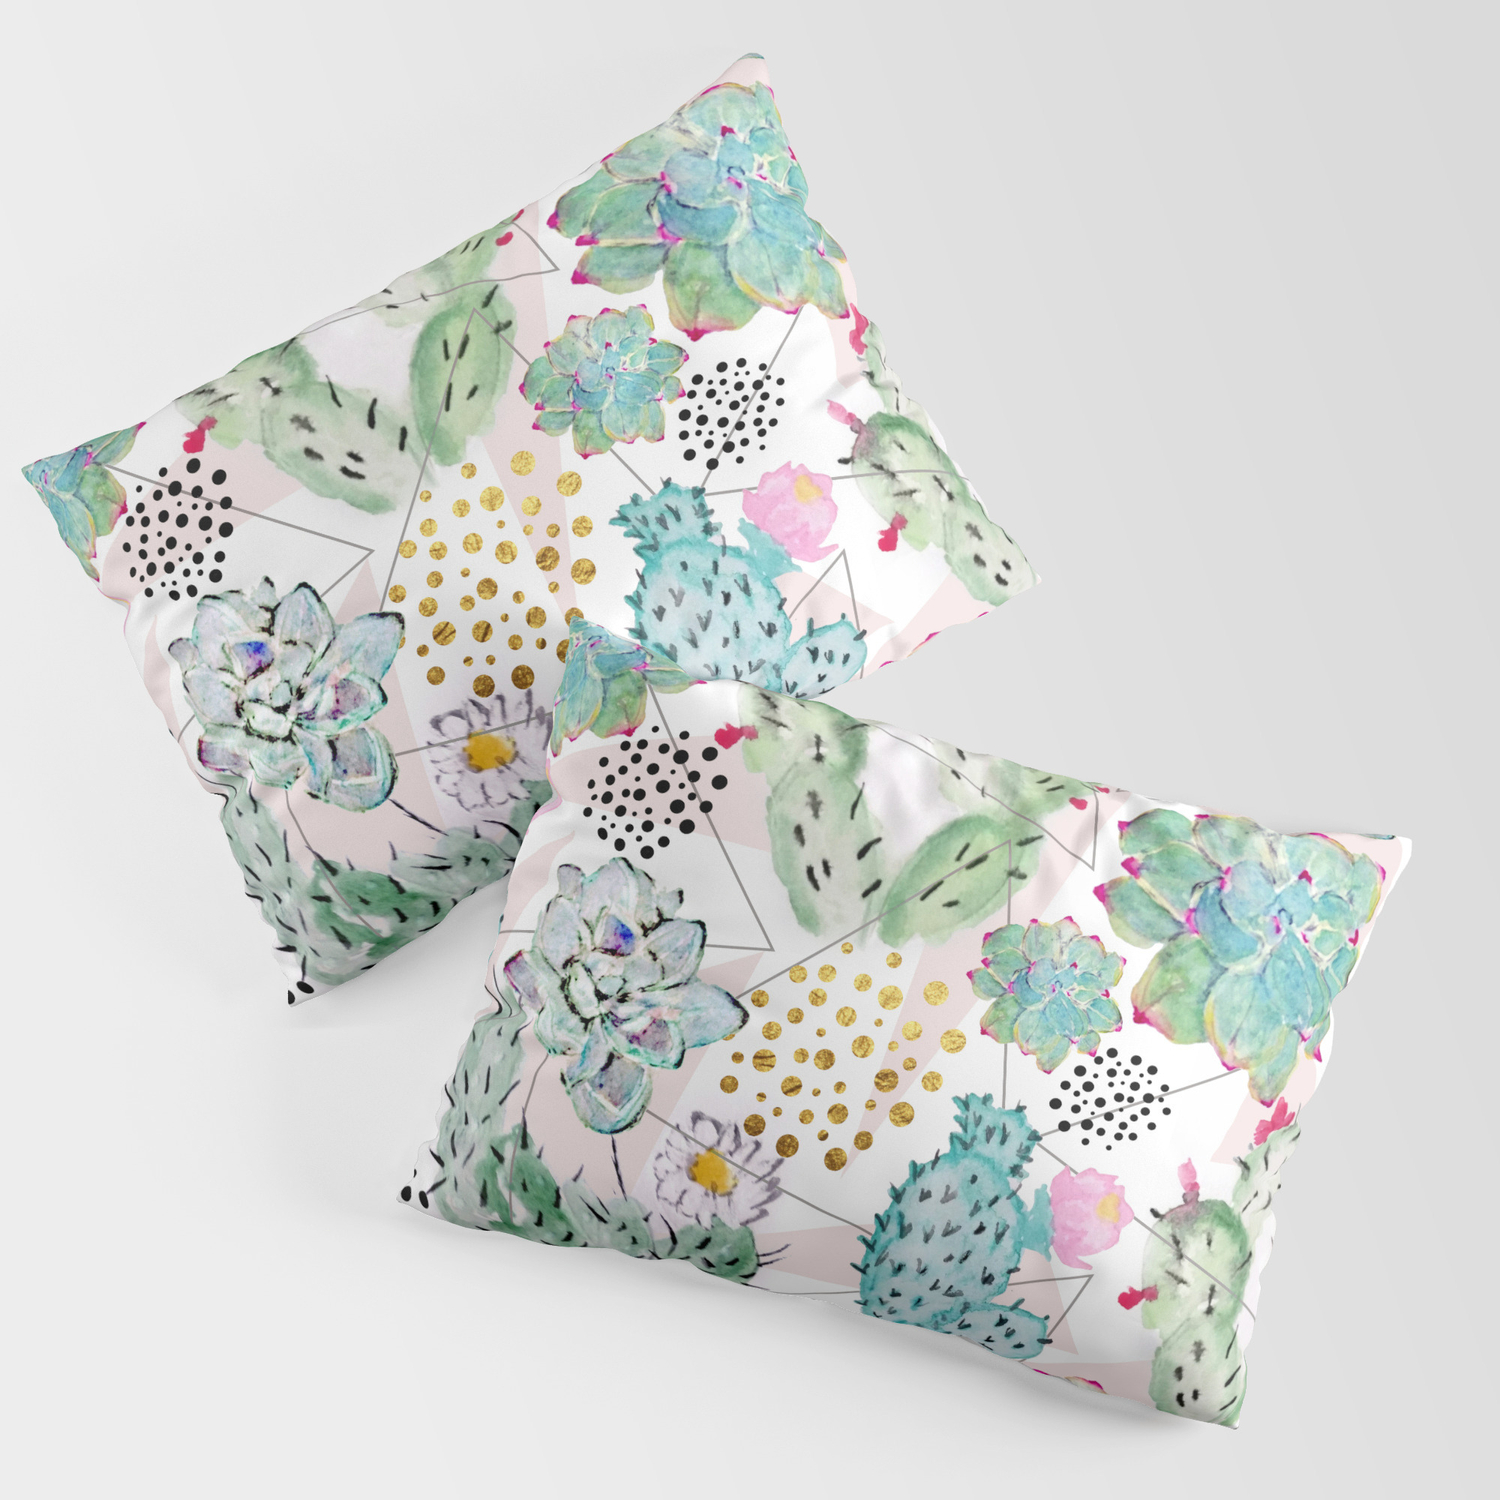 by Inovarts on Pillow Sham Society6 Pretty Watercolor Hand Paint Floral Artwork Cotton Standard Set of 2 